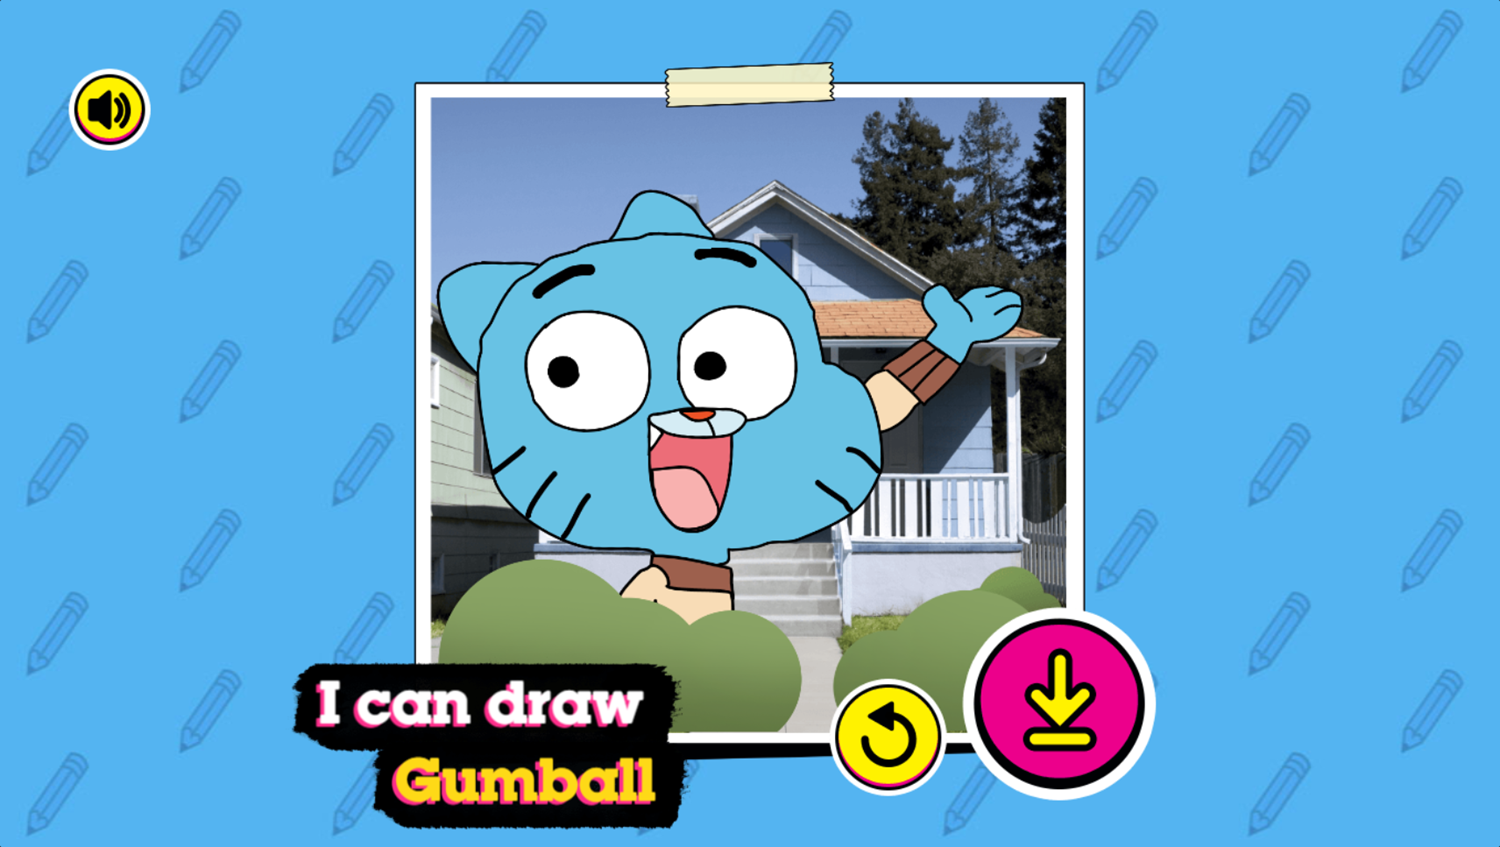 Amazing World of Gumball How to Draw Gumball Game Complete Screenshot.